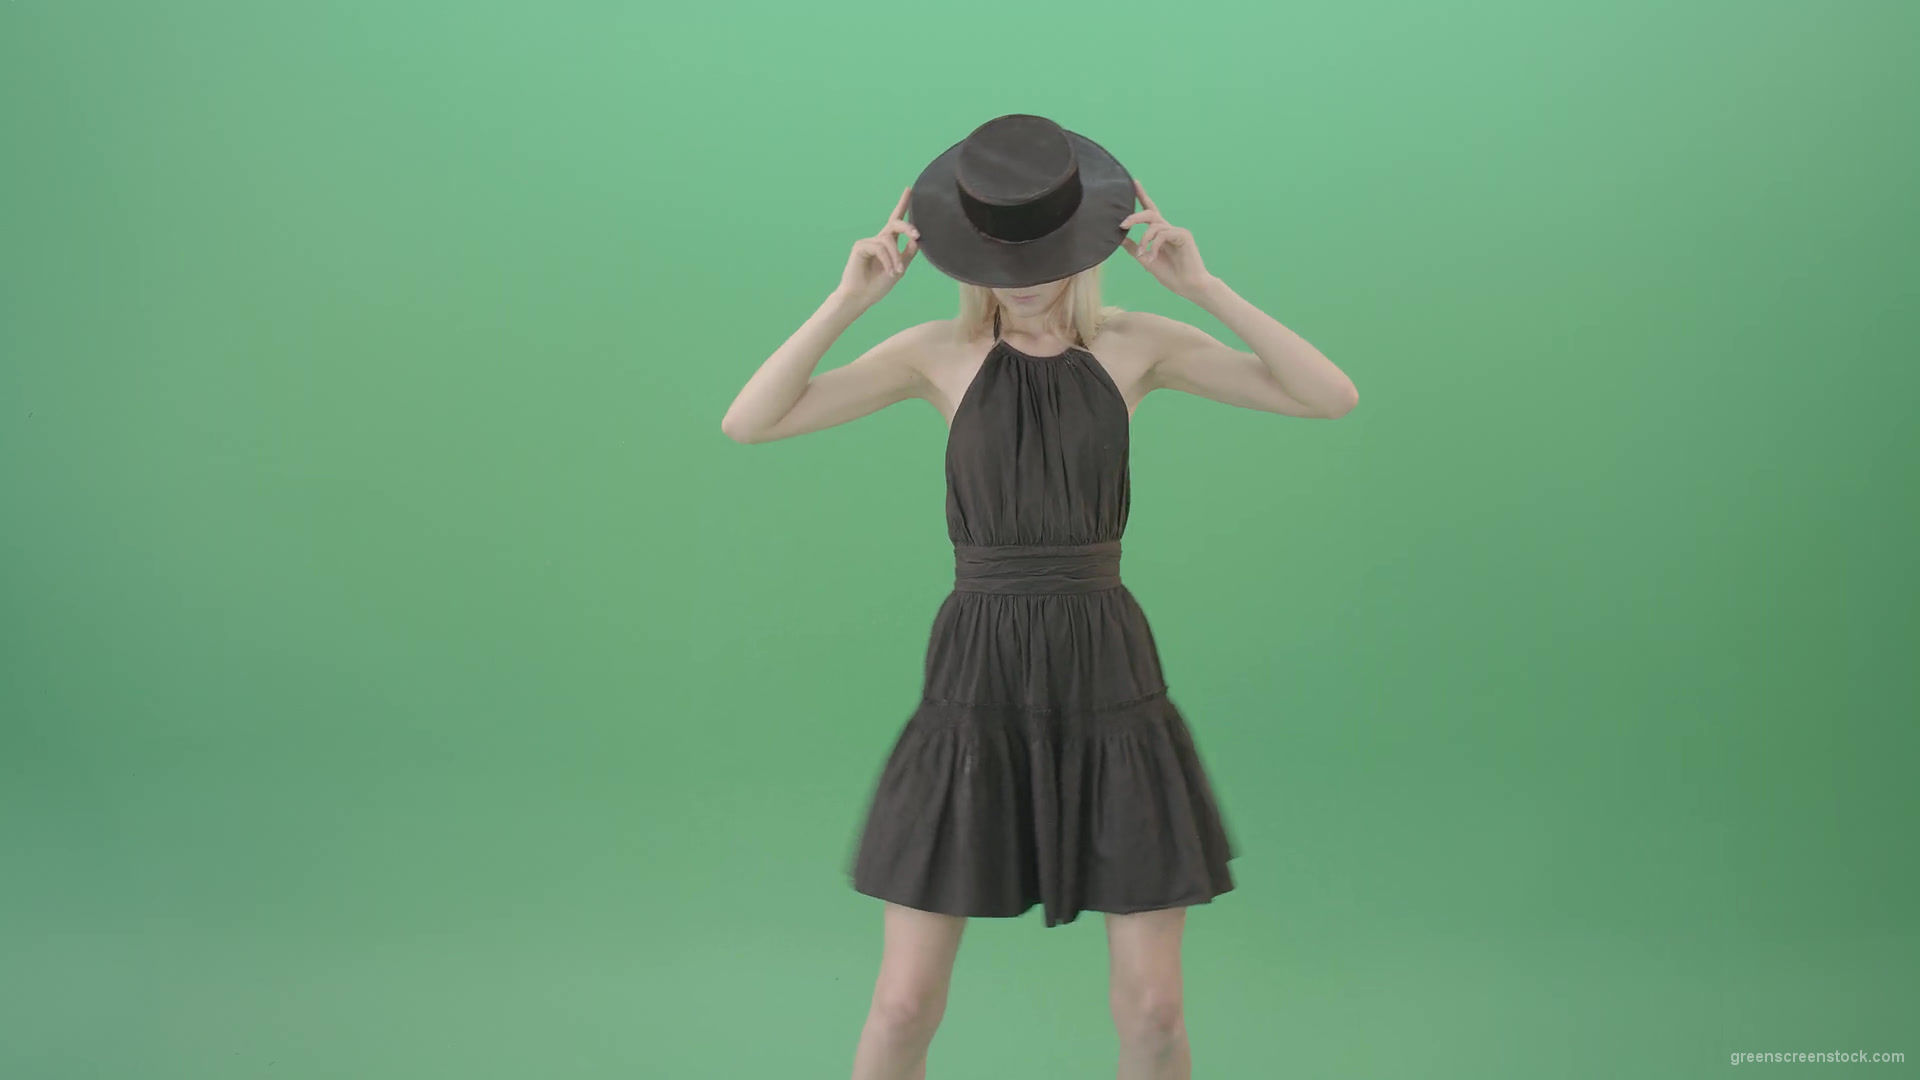 Elegant-girl-in-black-dress-and-hat-chilling-dance-isolated-on-green-screen-4K-Video-Footage-1920_009 Green Screen Stock